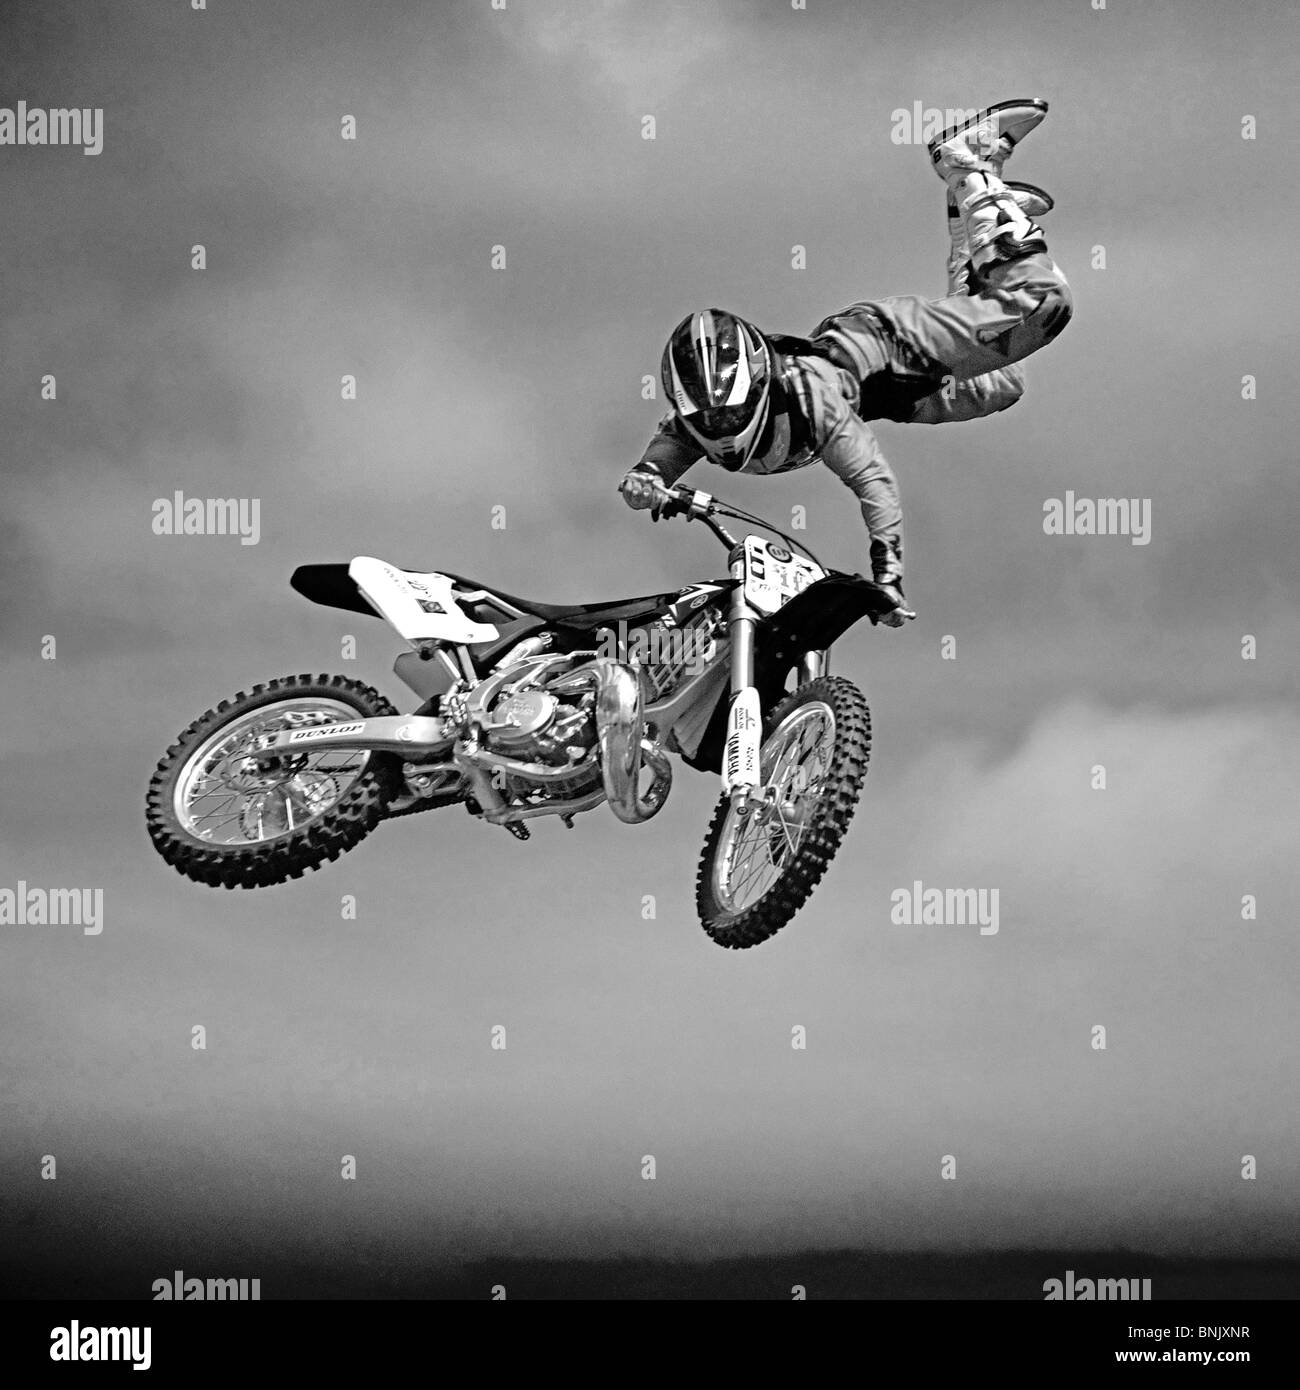 Freestyle motorcross jumper in black & white taken at the Goodwood Festival of speed as part of an acrobatic display Stock Photo